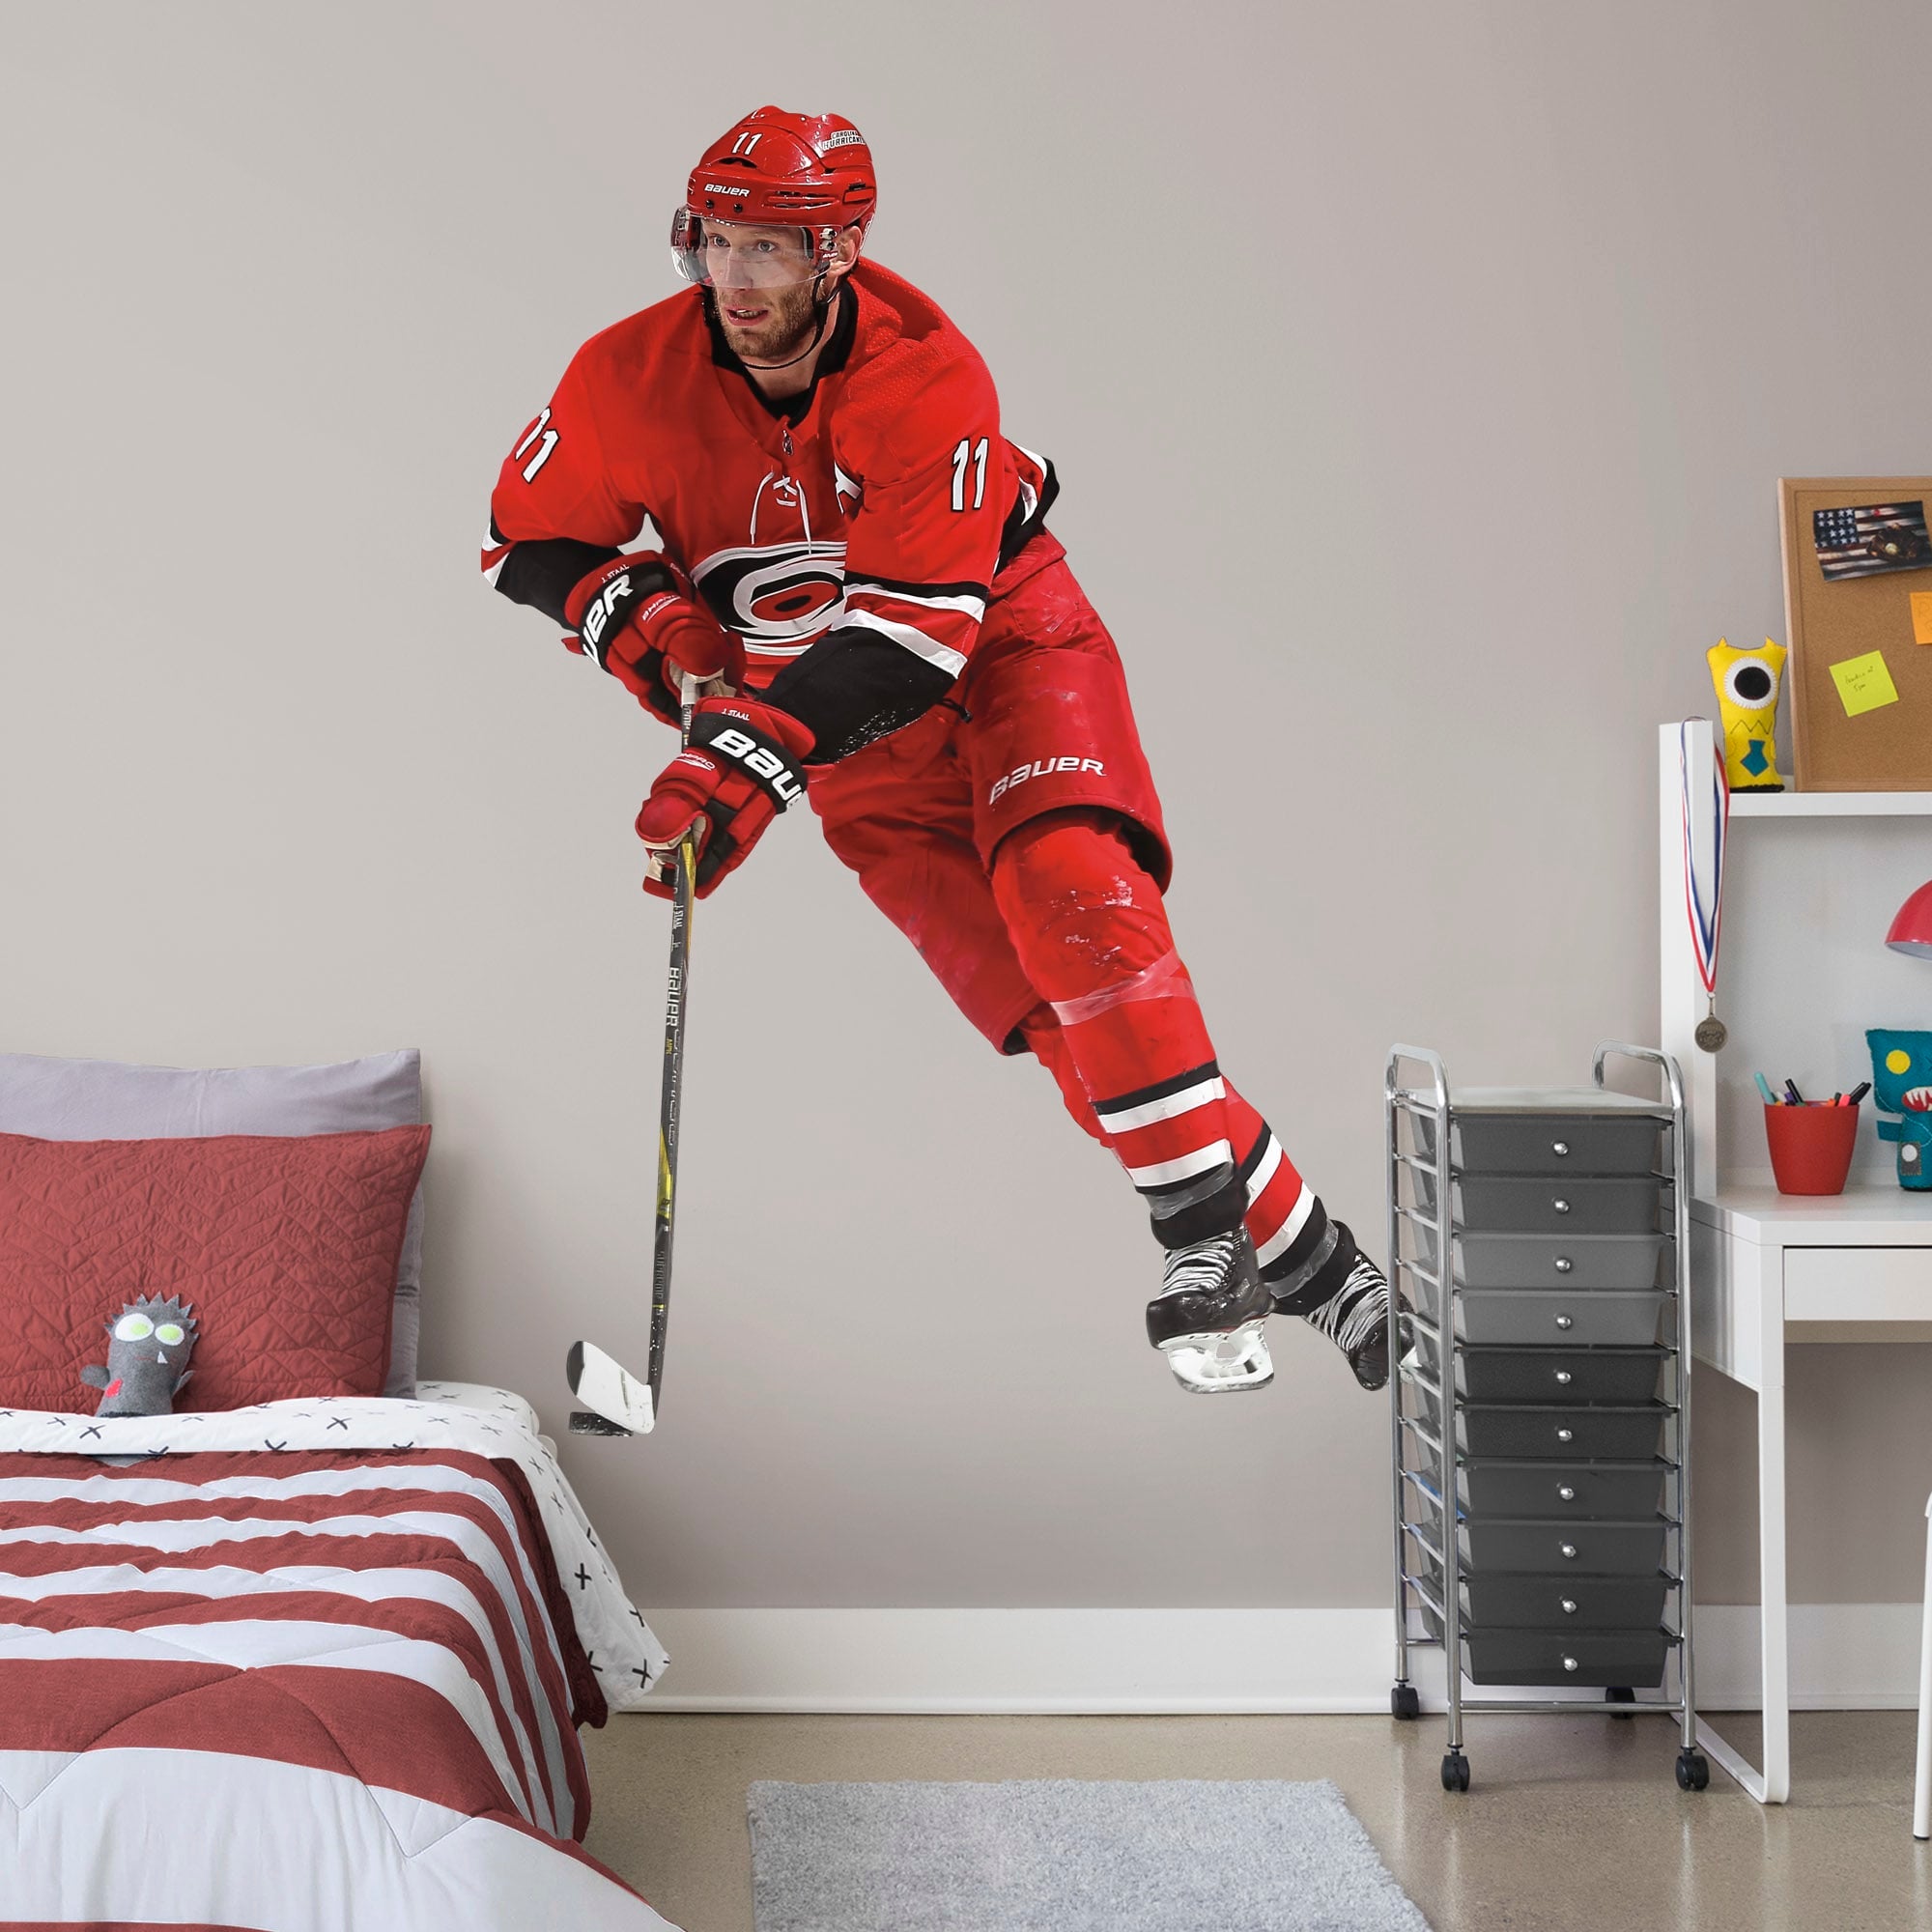 Jordan Staal for Carolina Hurricanes - Officially Licensed NHL Removable Wall Decal Life-Size Athlete + 2 Decals (55"W x 76"H) b